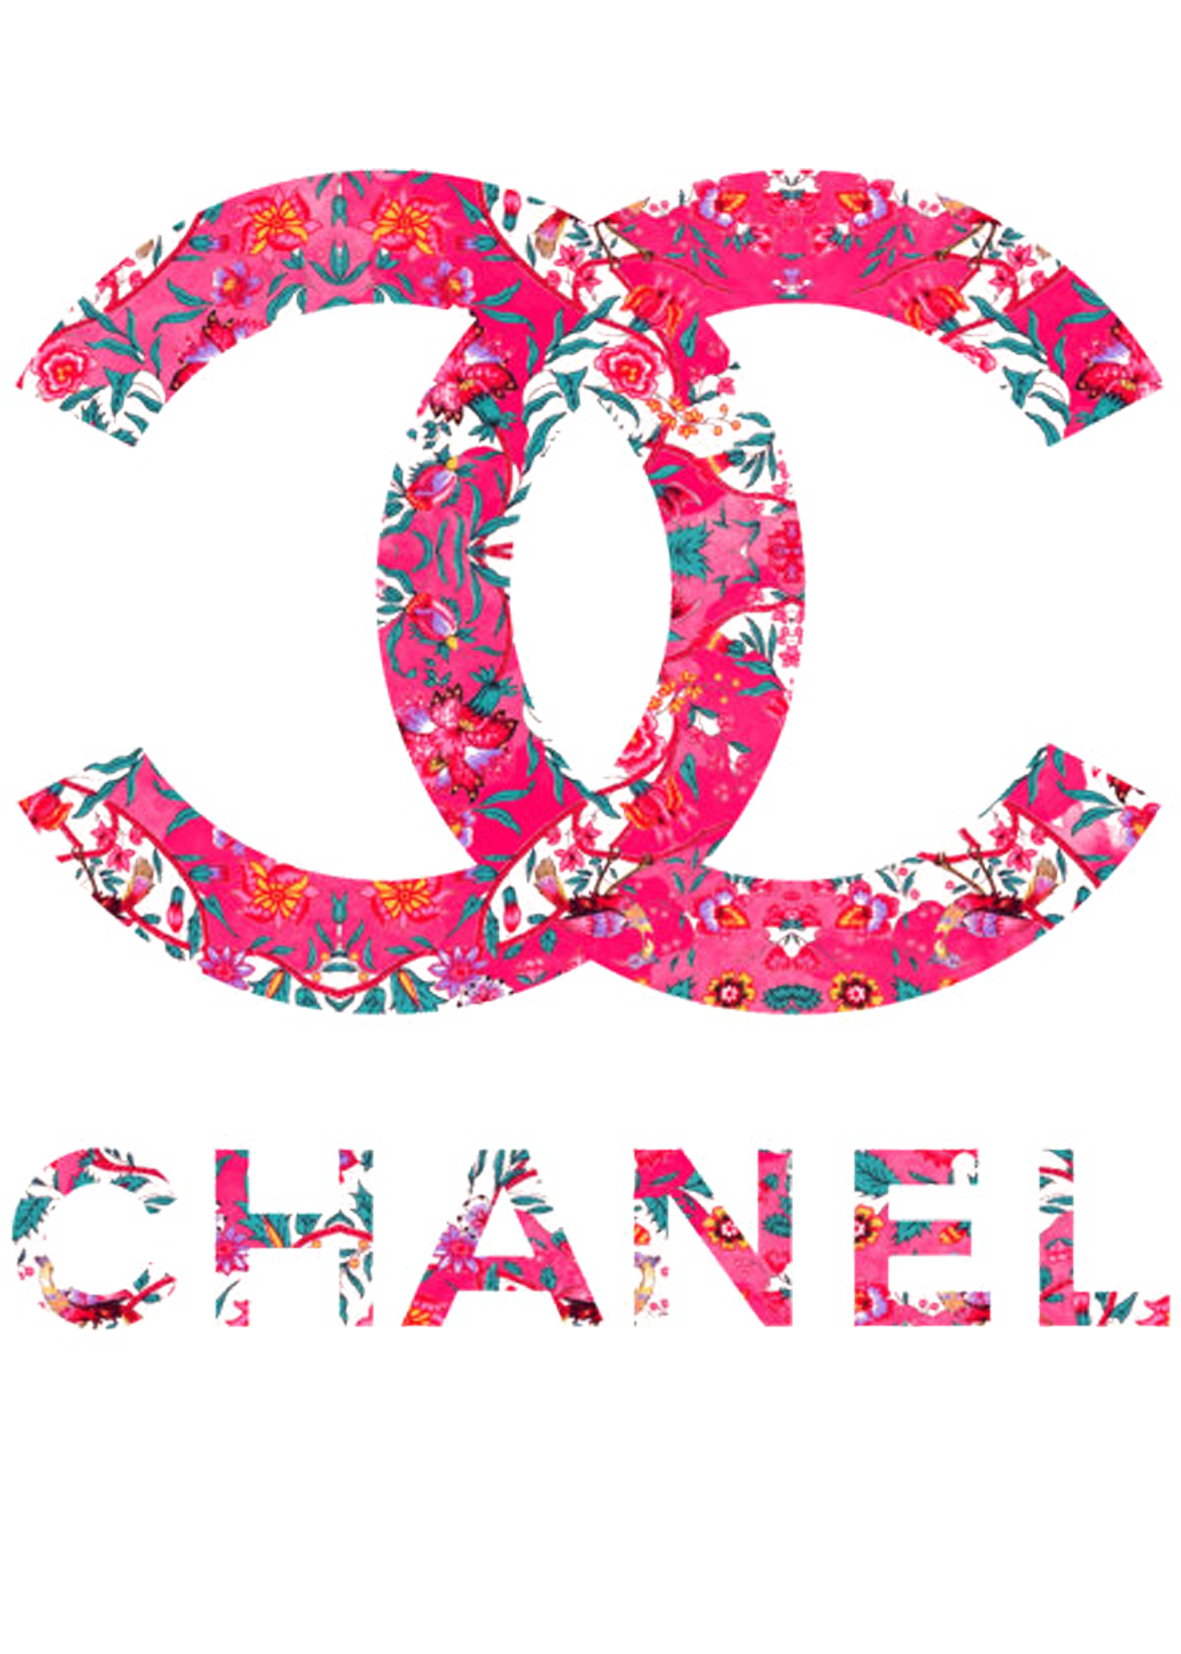 Fashion Haute Couture Iphone Coco Chanel PNG Image